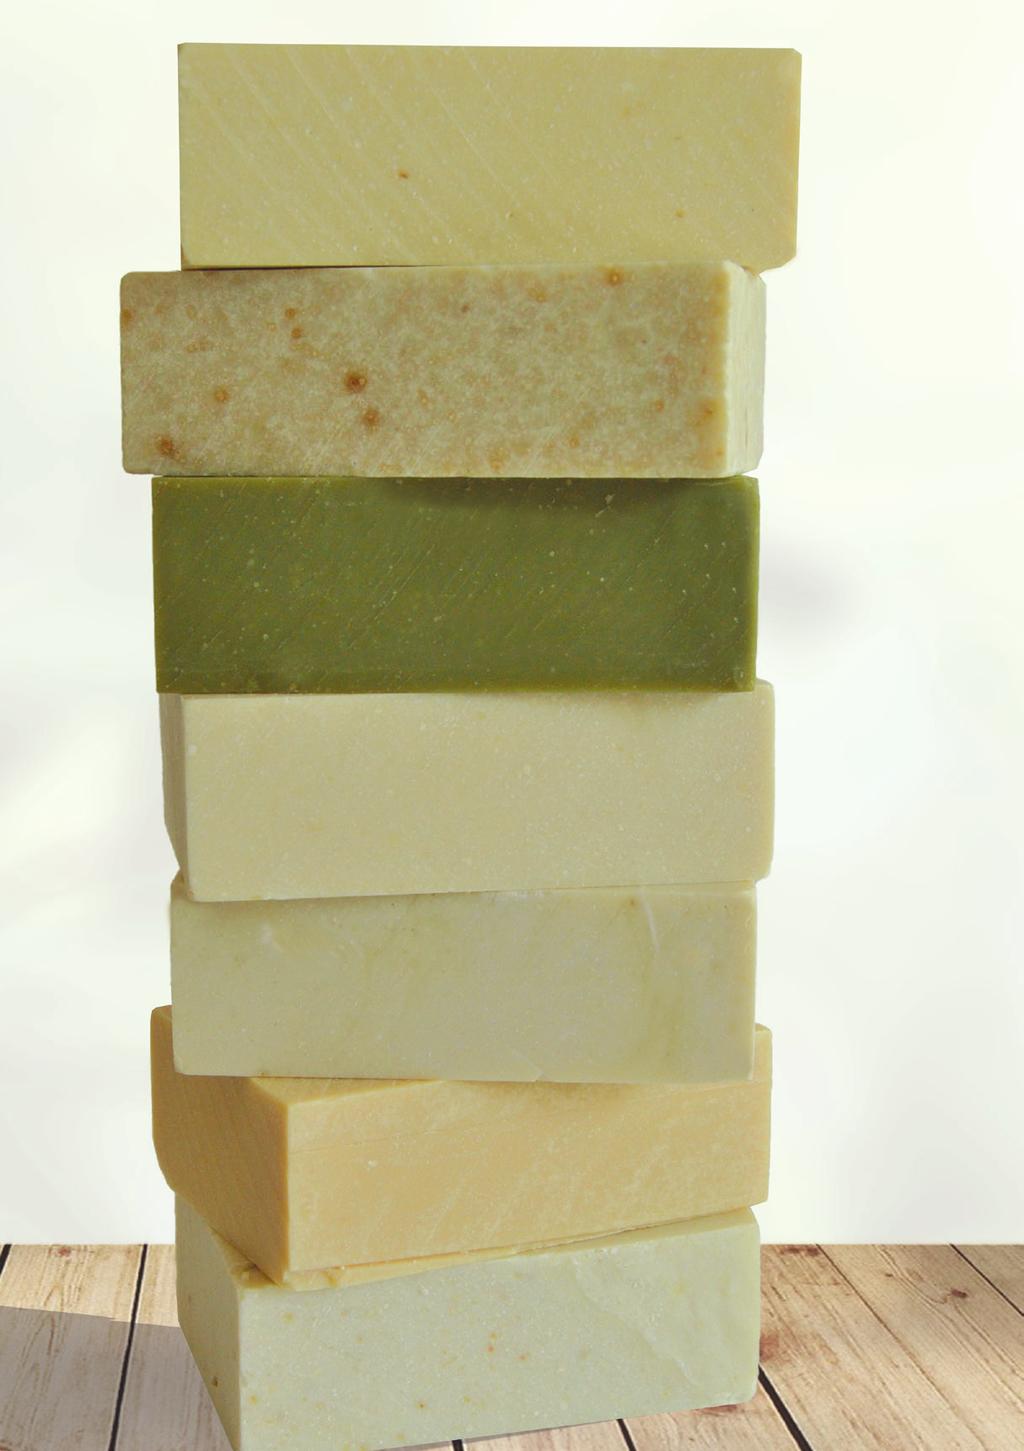 Juniper Sulfur Natural Soap Laurel Turkish Bath AgroHoby is offereing you 100% Natural and healthy Soaps.